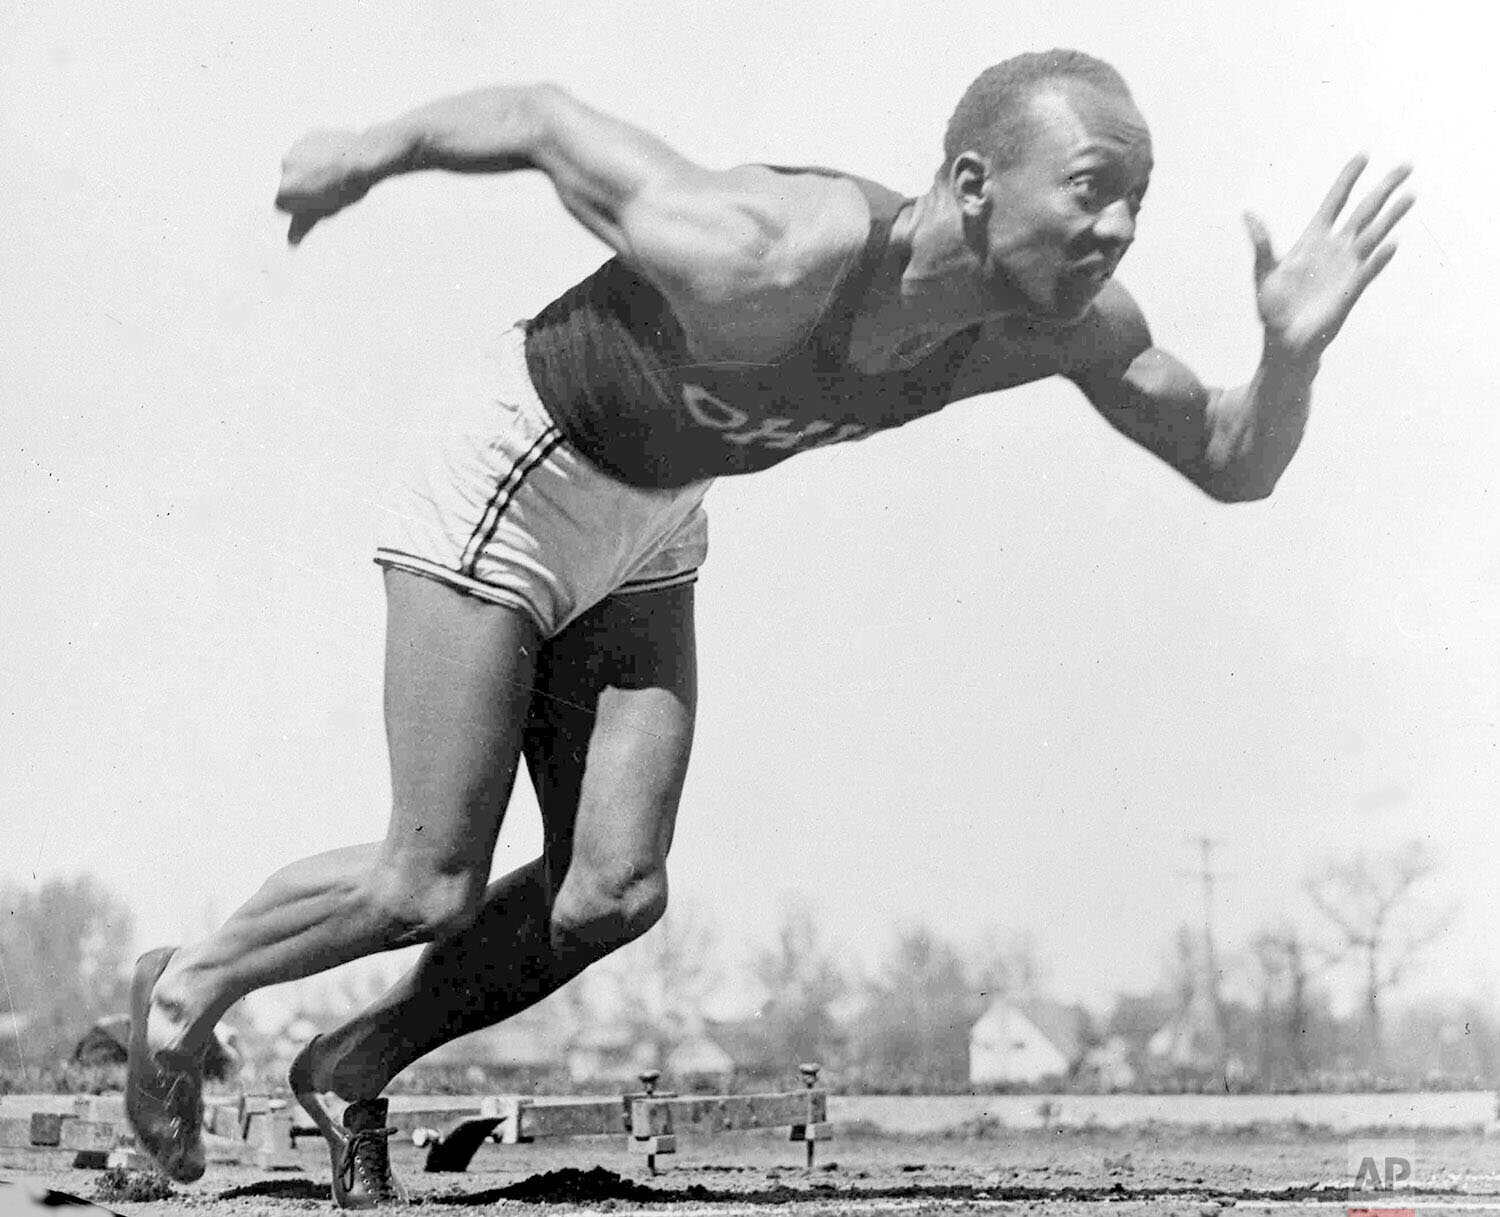  American athlete Jesse Owens practices in the Olympic Village in Berlin, Aug. 5, 1936.  Shortly after Owens returned home from his snubbing by Adolph Hitler at the 1936 Olympics, he and America's 17 other black Olympians found a less-than-welcoming 